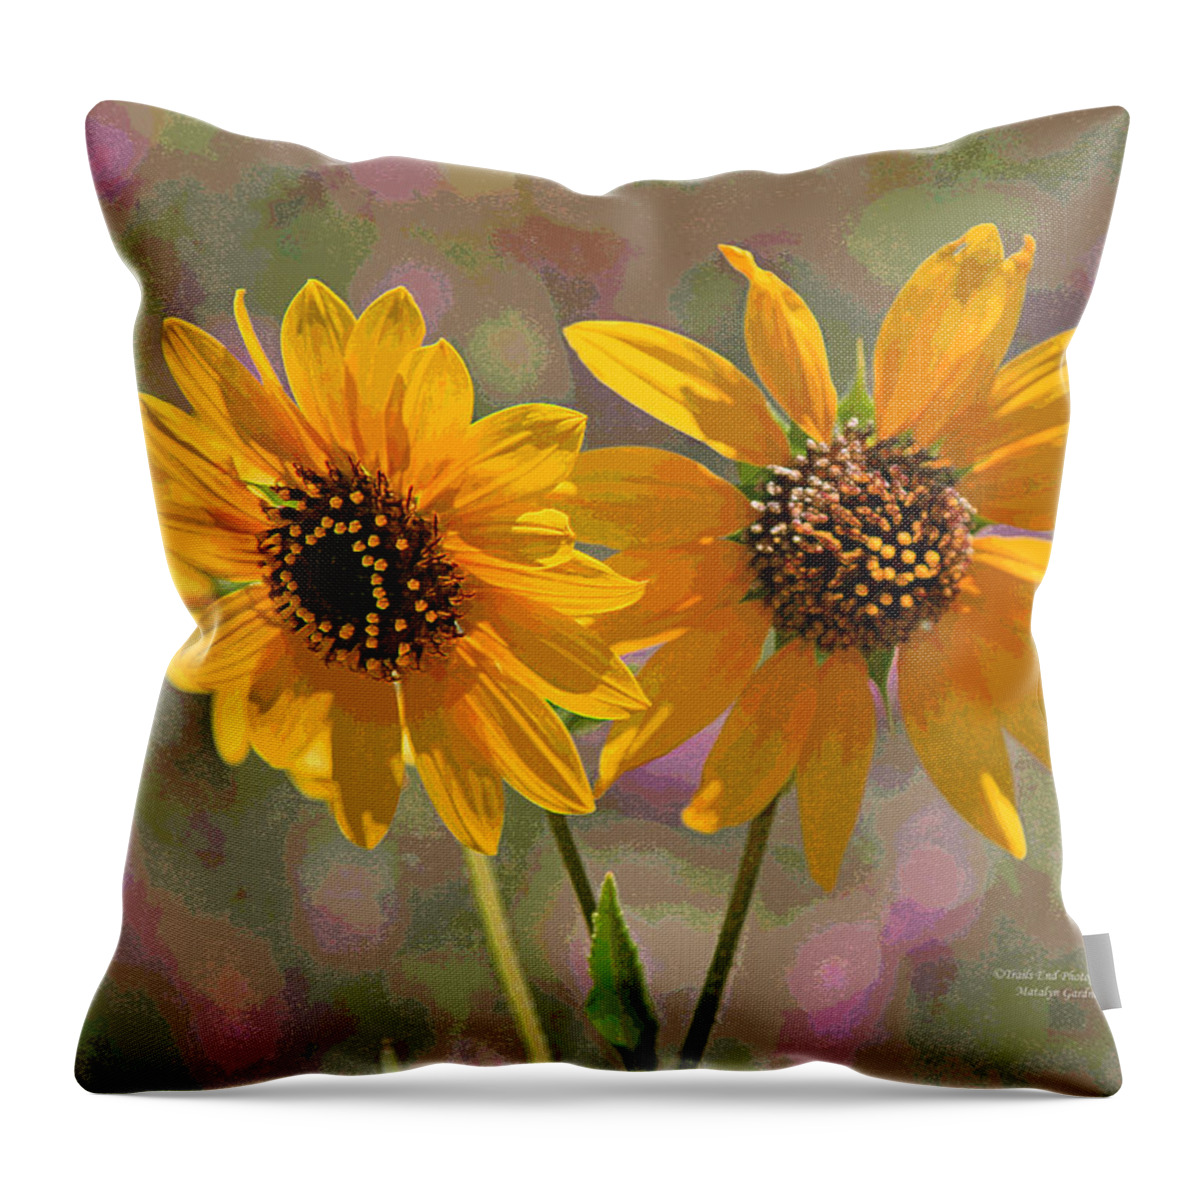  Throw Pillow featuring the photograph Black-eyed Susan by Matalyn Gardner